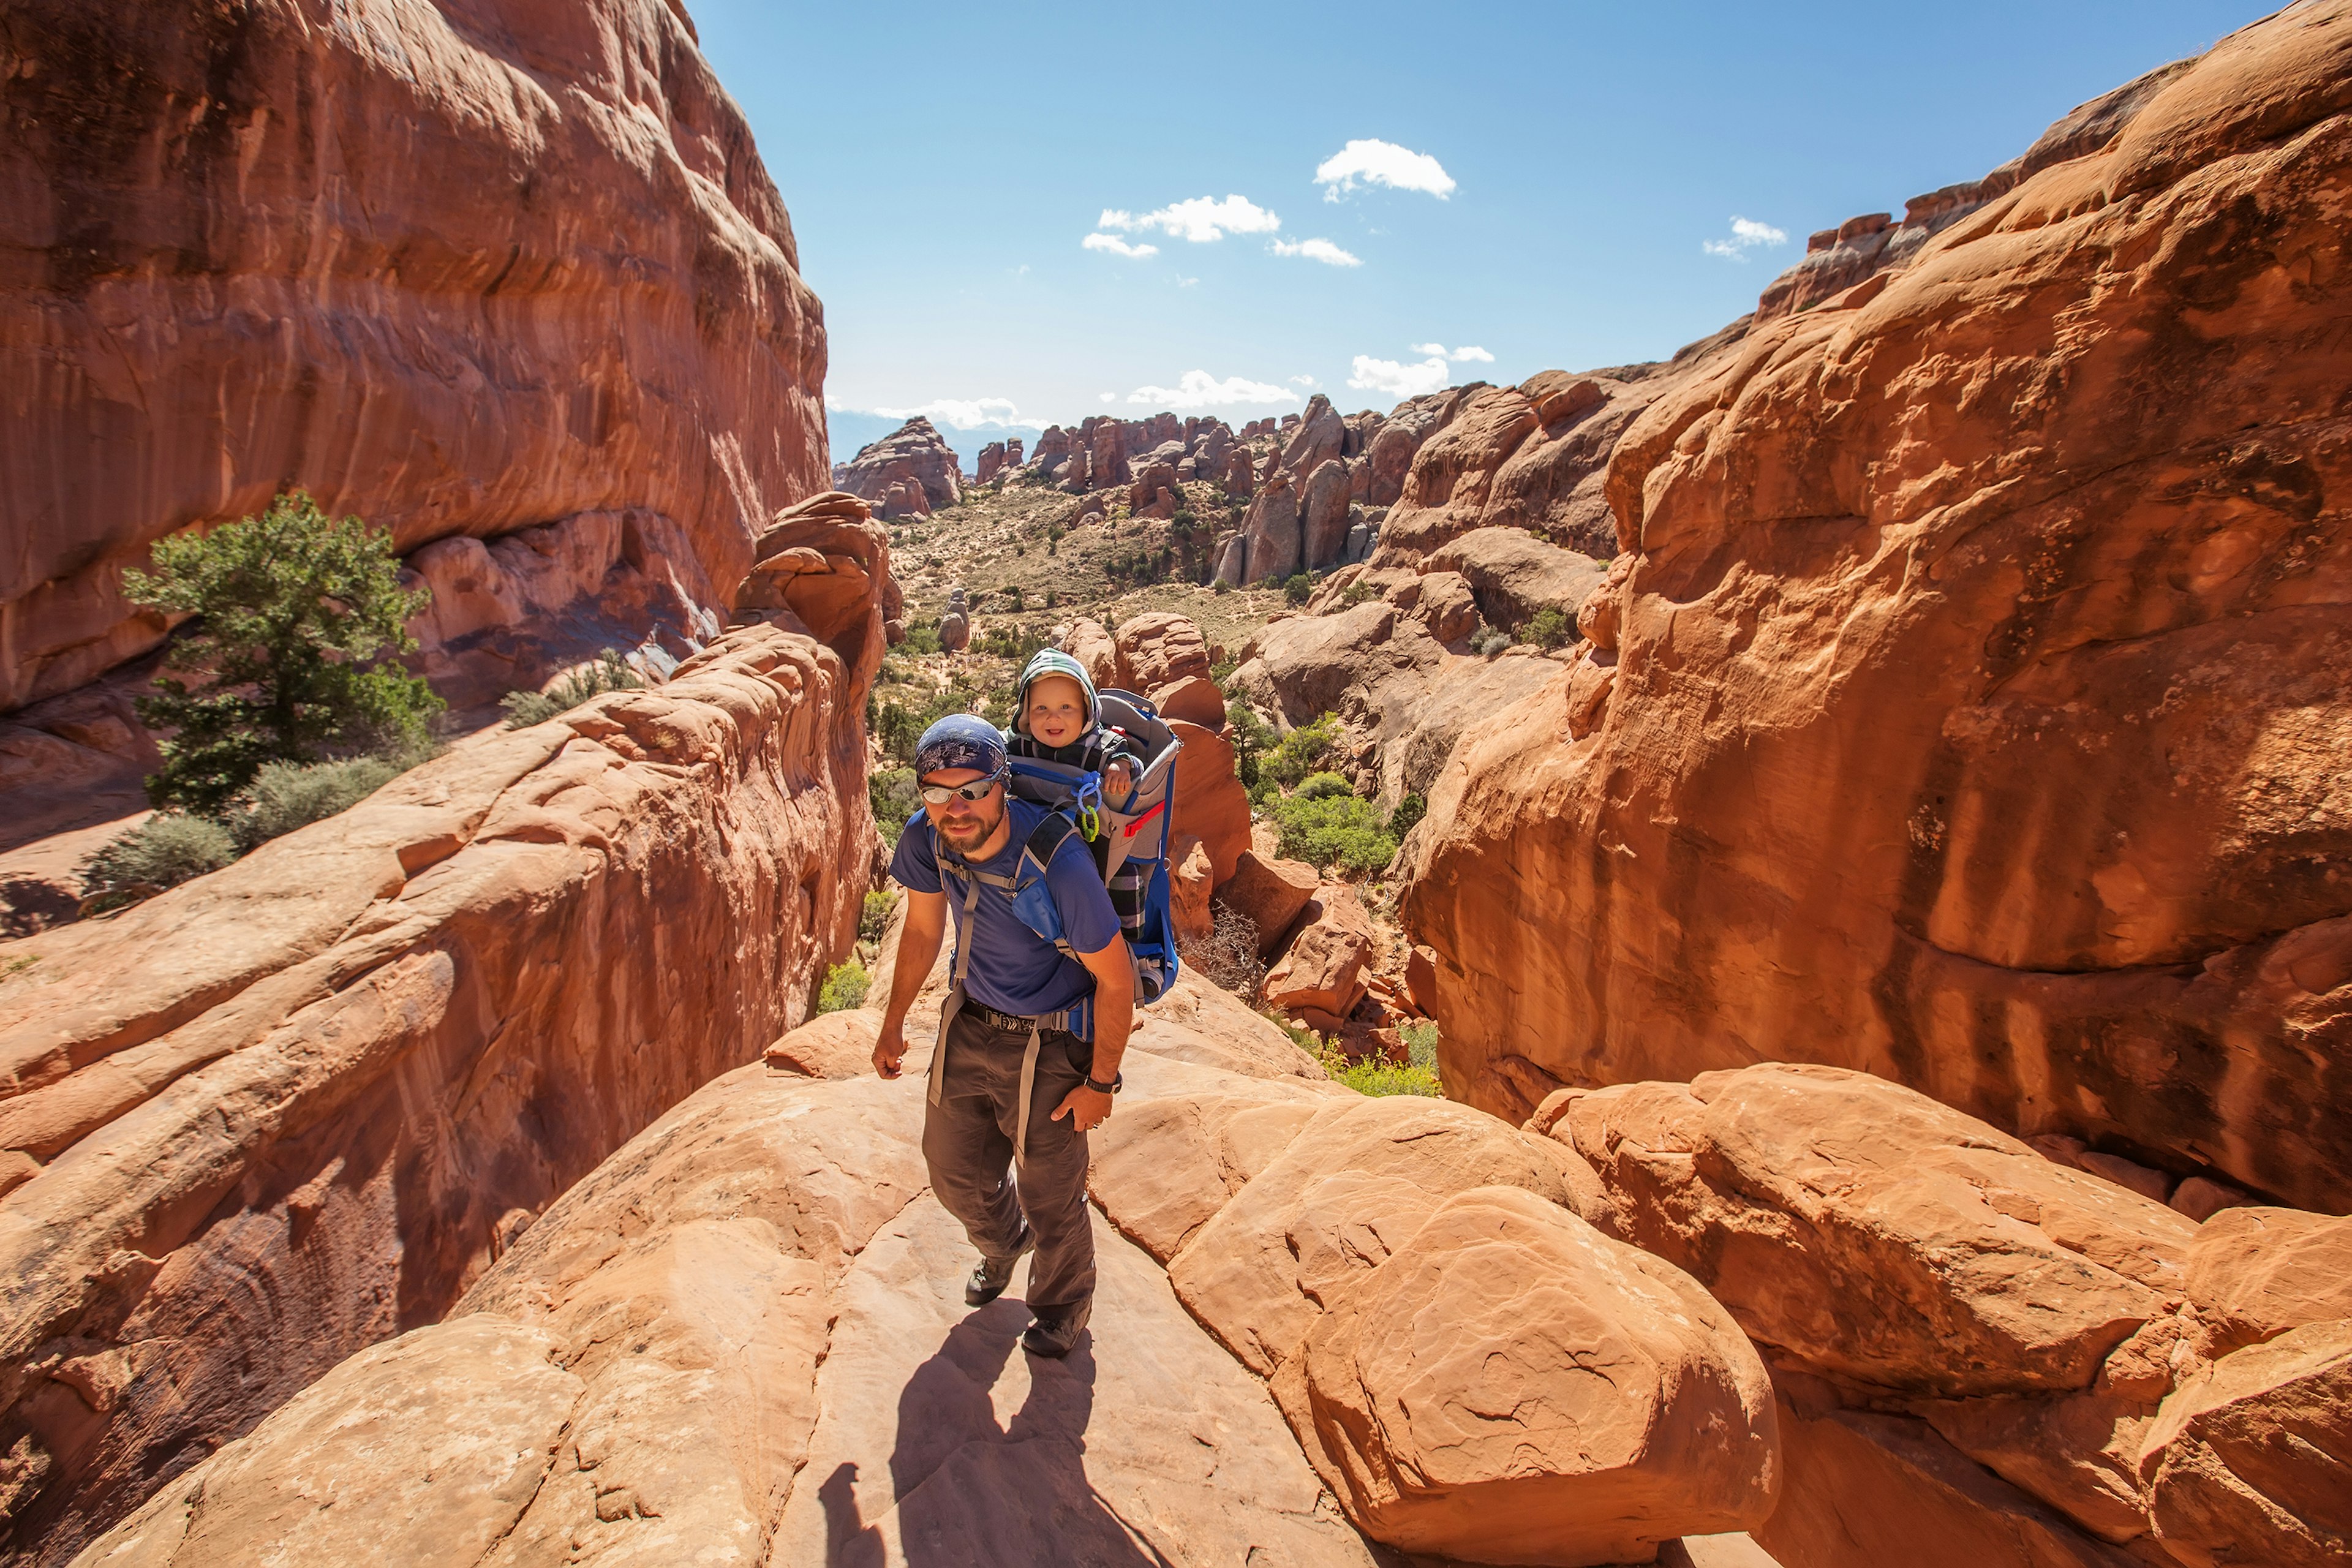 There's no minimum age for enjoying the thrills of Arches National Park